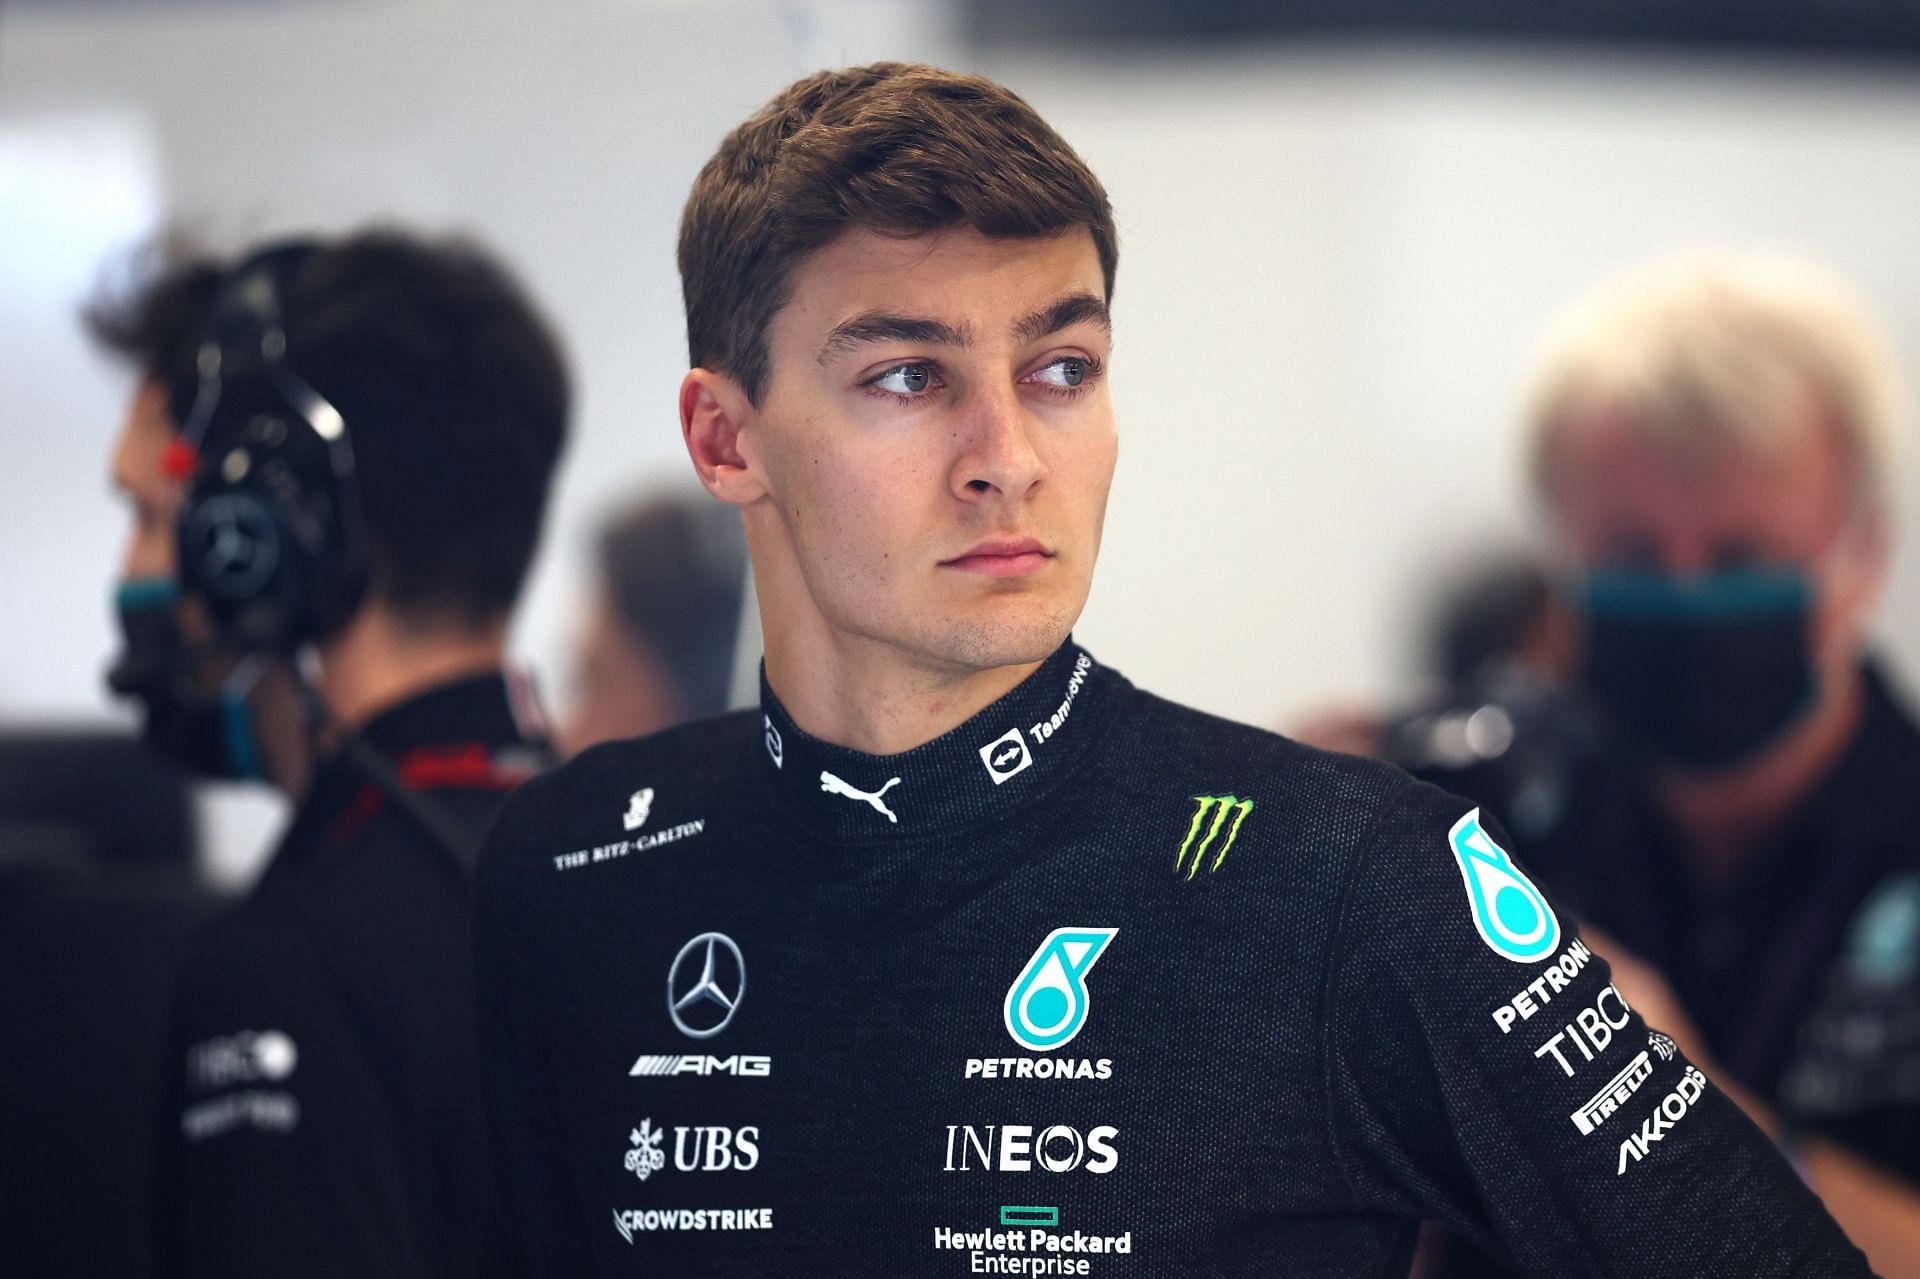 George Russell looks on in the garage during final practice ahead of the 2022 Saudi Arabian GP (Photo by Lars Baron/Getty Images)